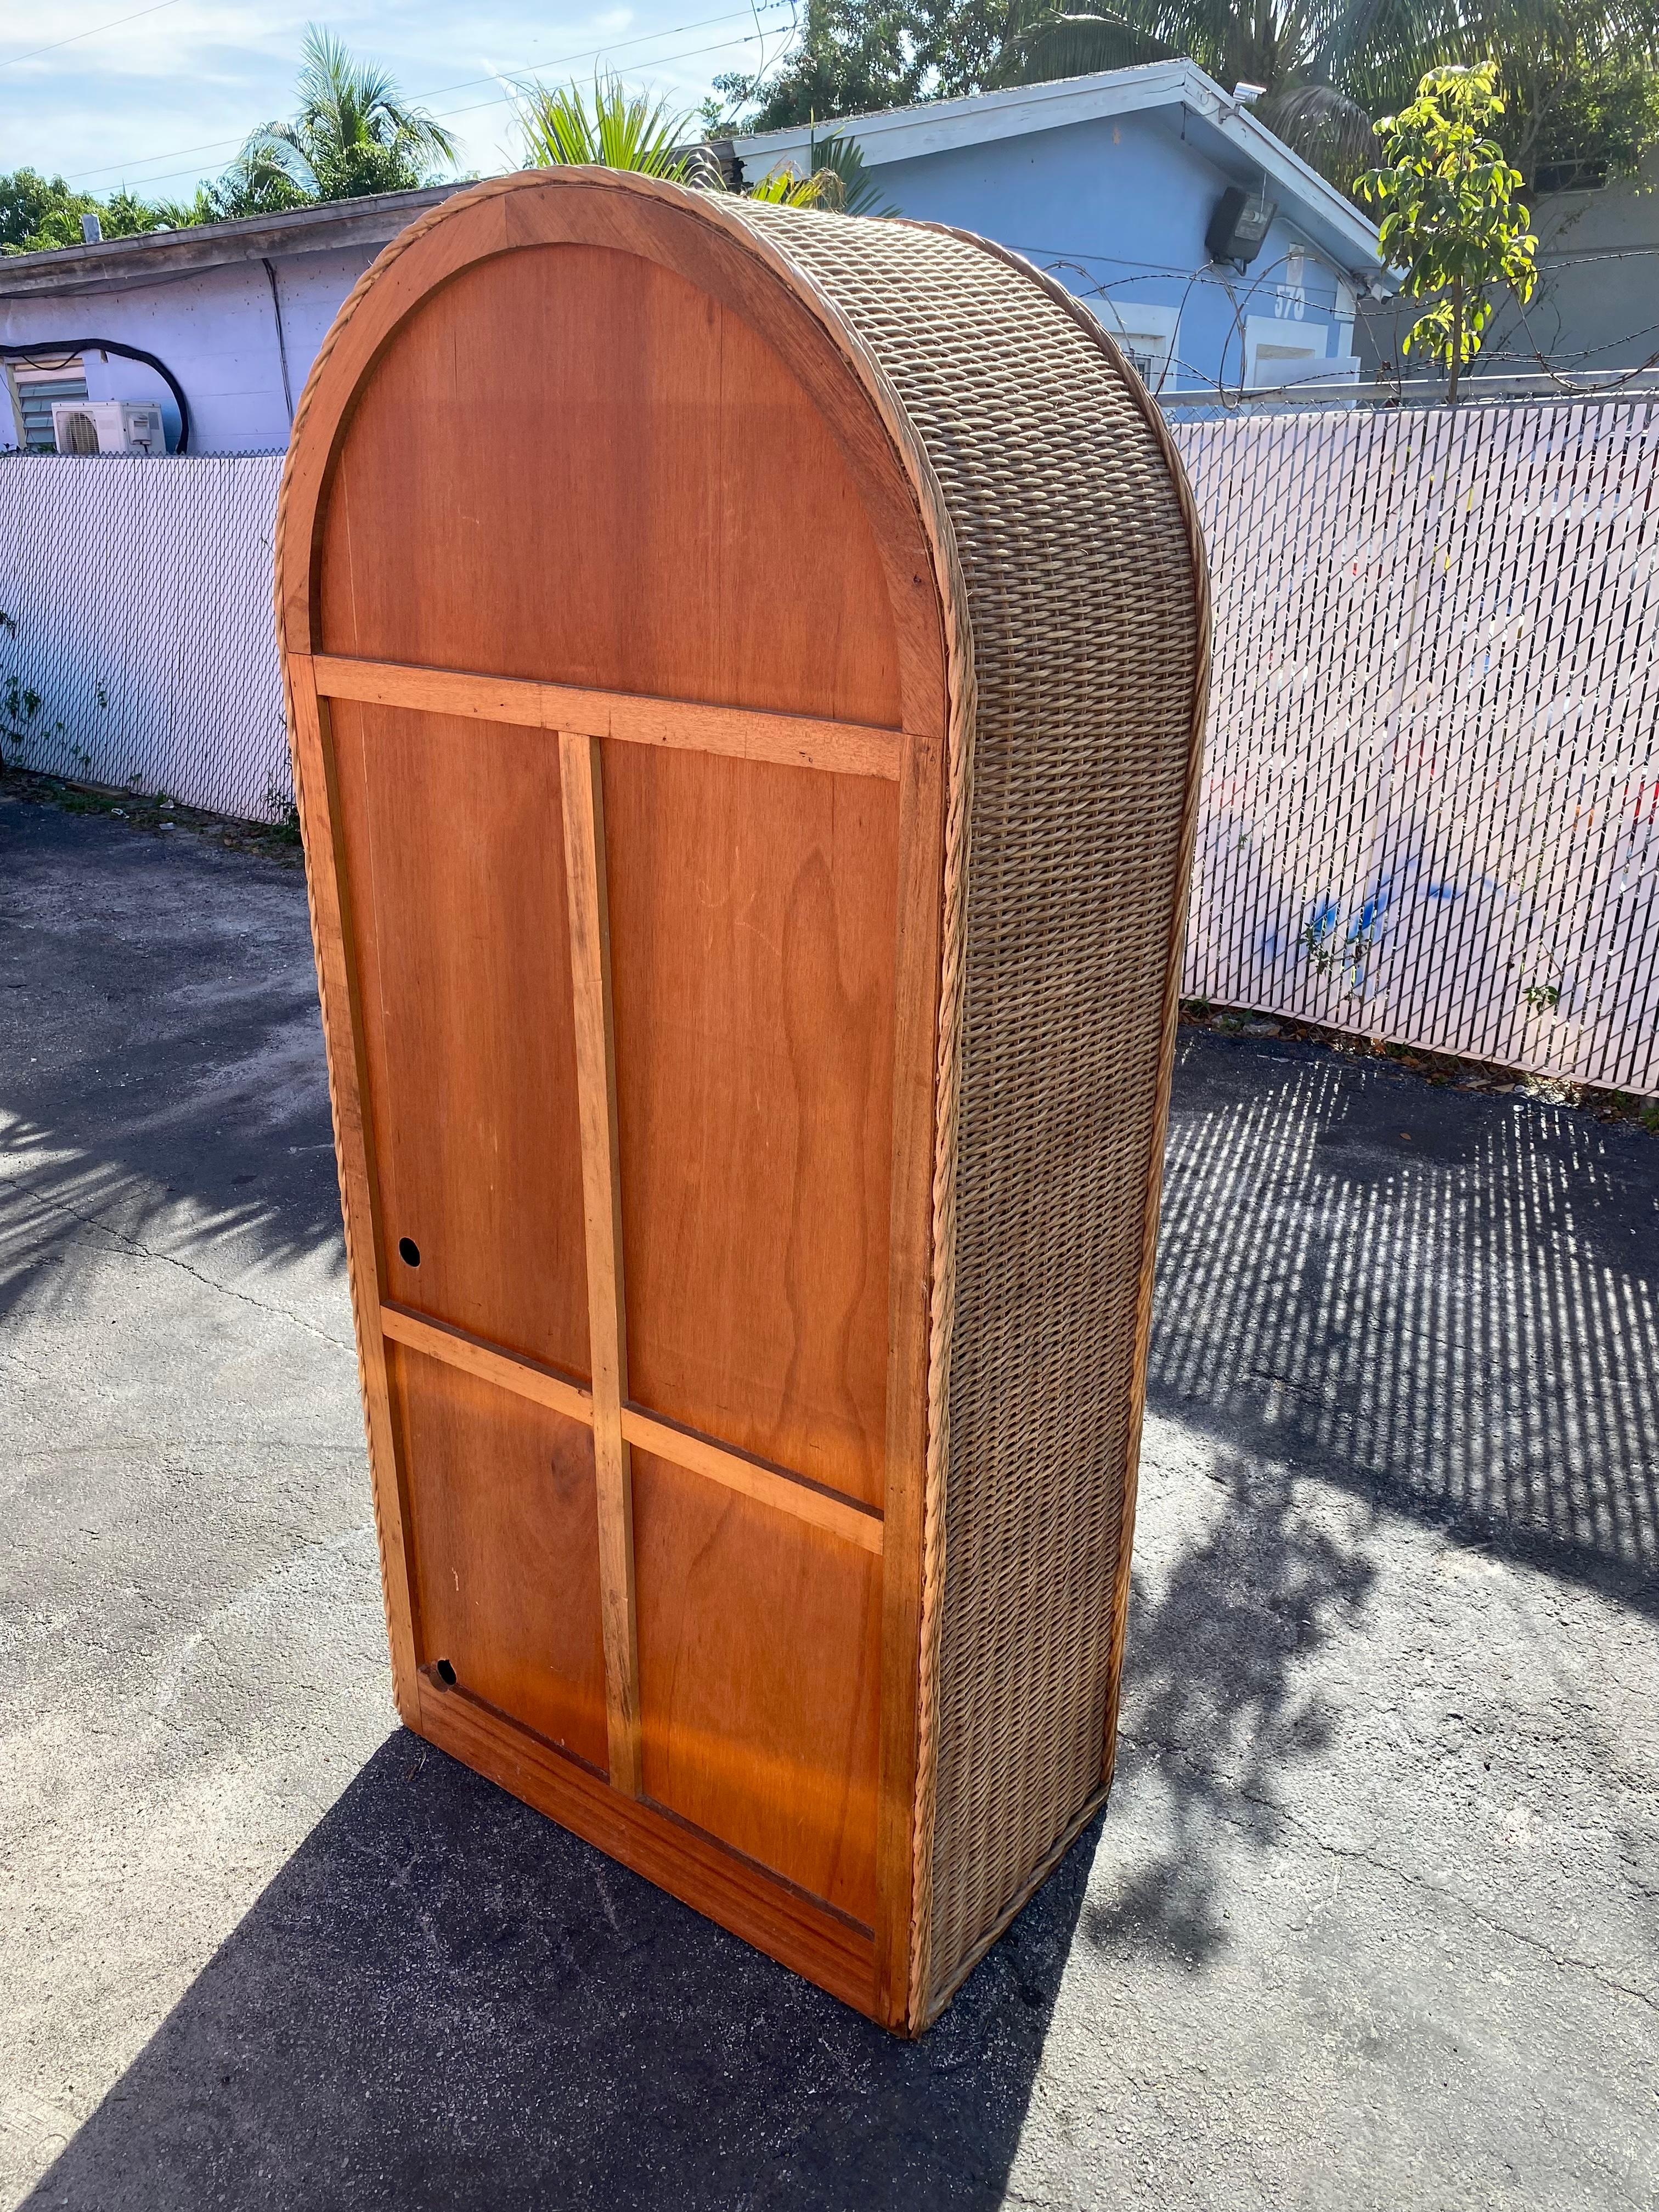 Late 20th Century 1970s Rattan Curved Top Armoire Wardrobe Storage Cabinet For Sale